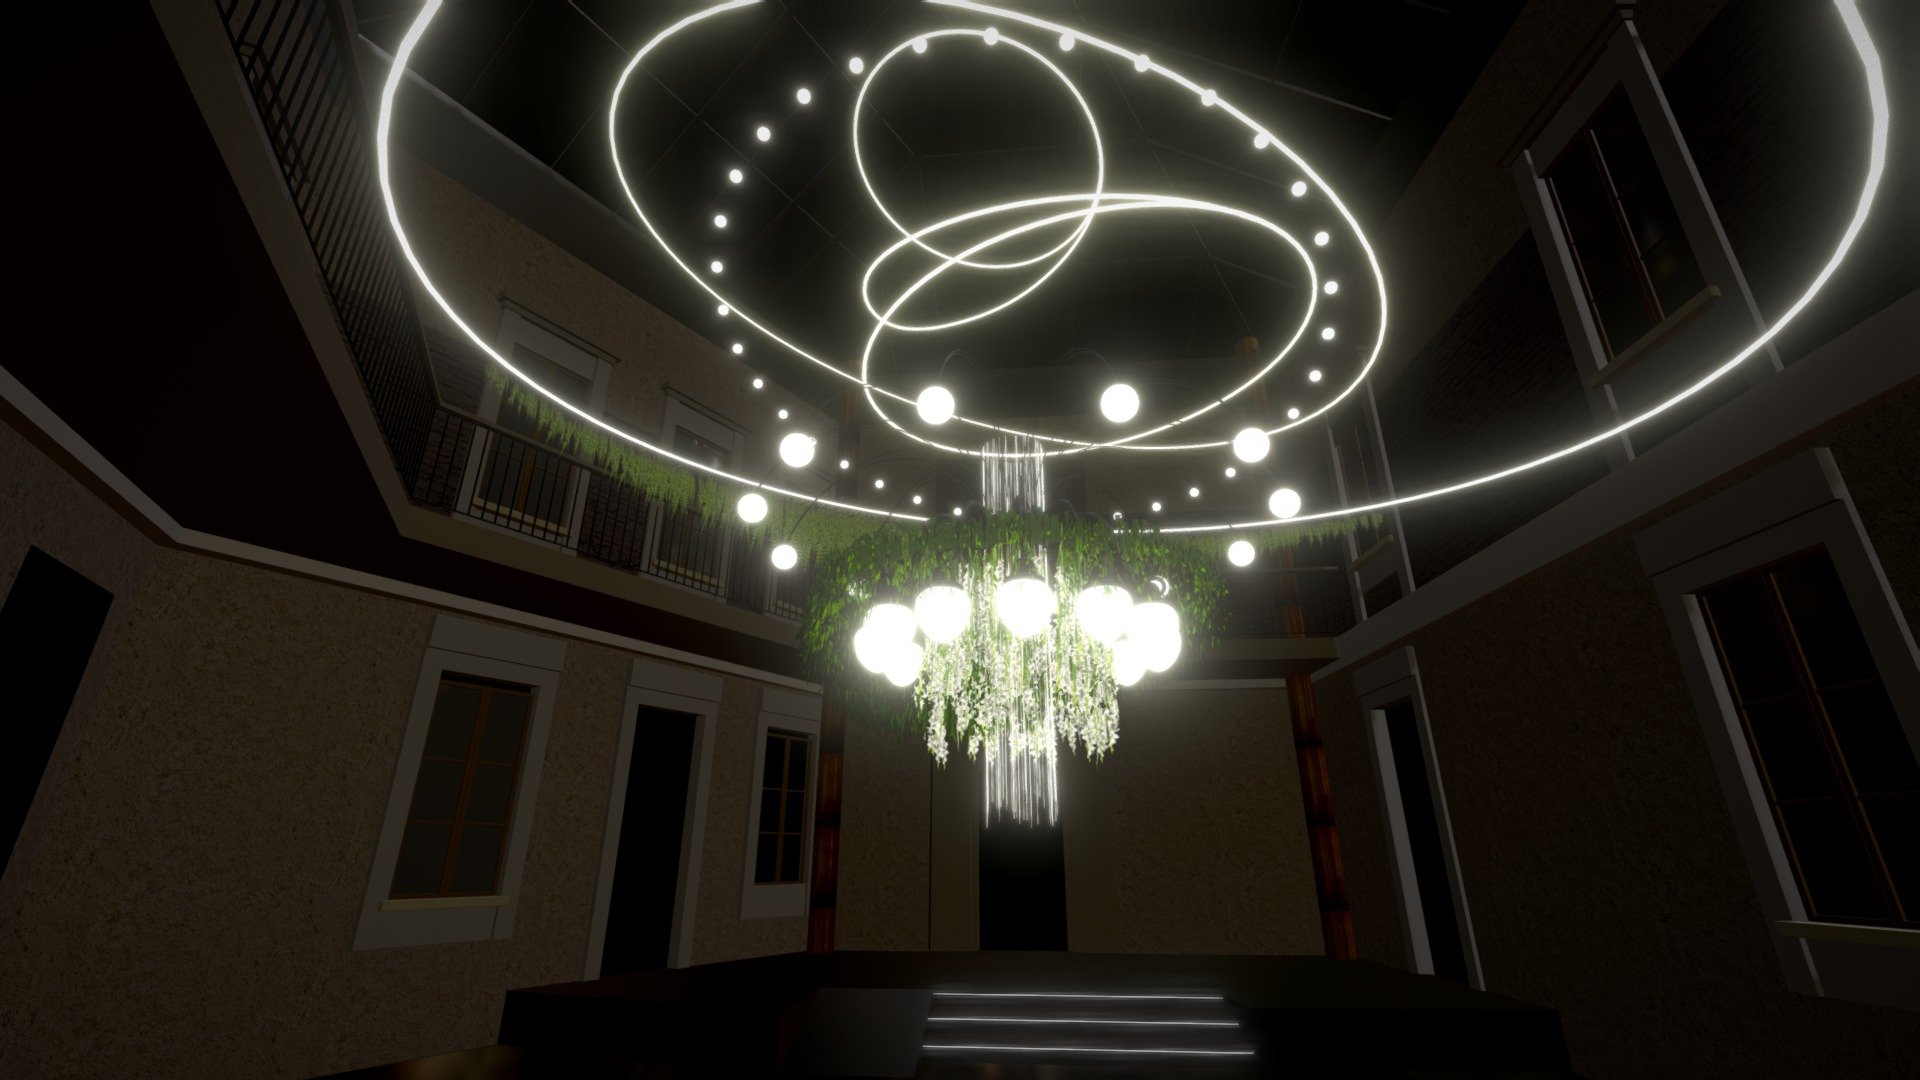 This giant moving chandelier is designed for an amazing palace wedding project. The movement of the light rings is very smooth. Fastening with metal strings to ring gears in the ceiling. Light rings and spirals, precise lamps arranged in a circle move at different speeds, recalling the time. Therefore, the project is called &ldquo;celestial mechanics